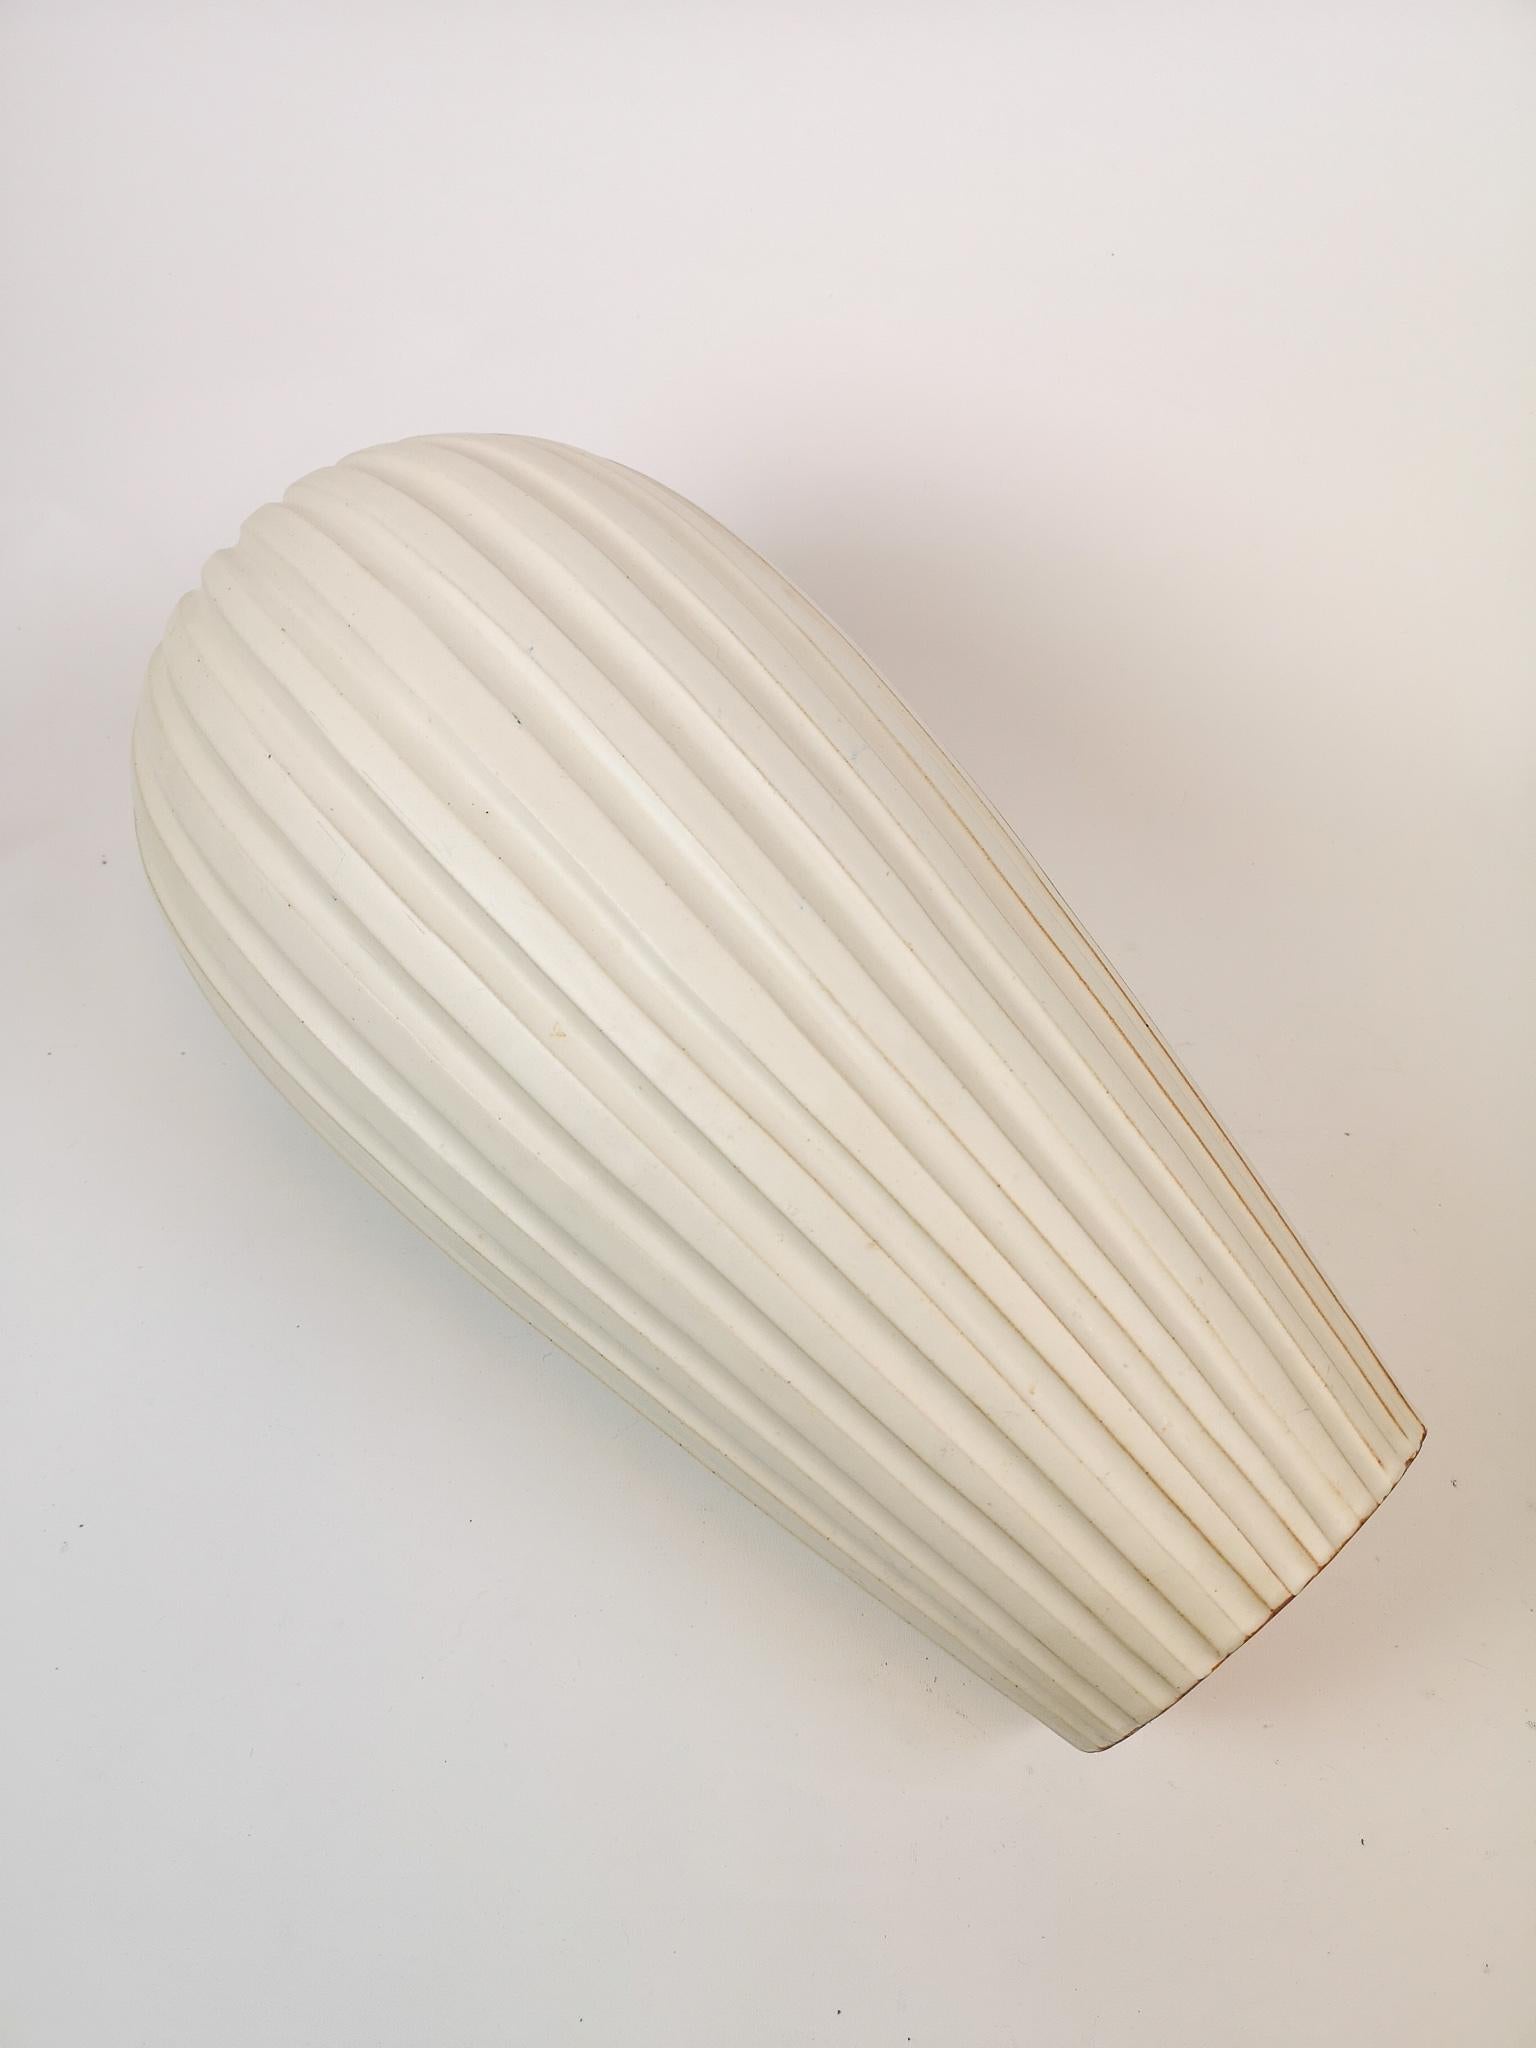 Mid-20th Century Midcentury Floor Vase by Vicke Lindstrand, 1940s, Sweden For Sale